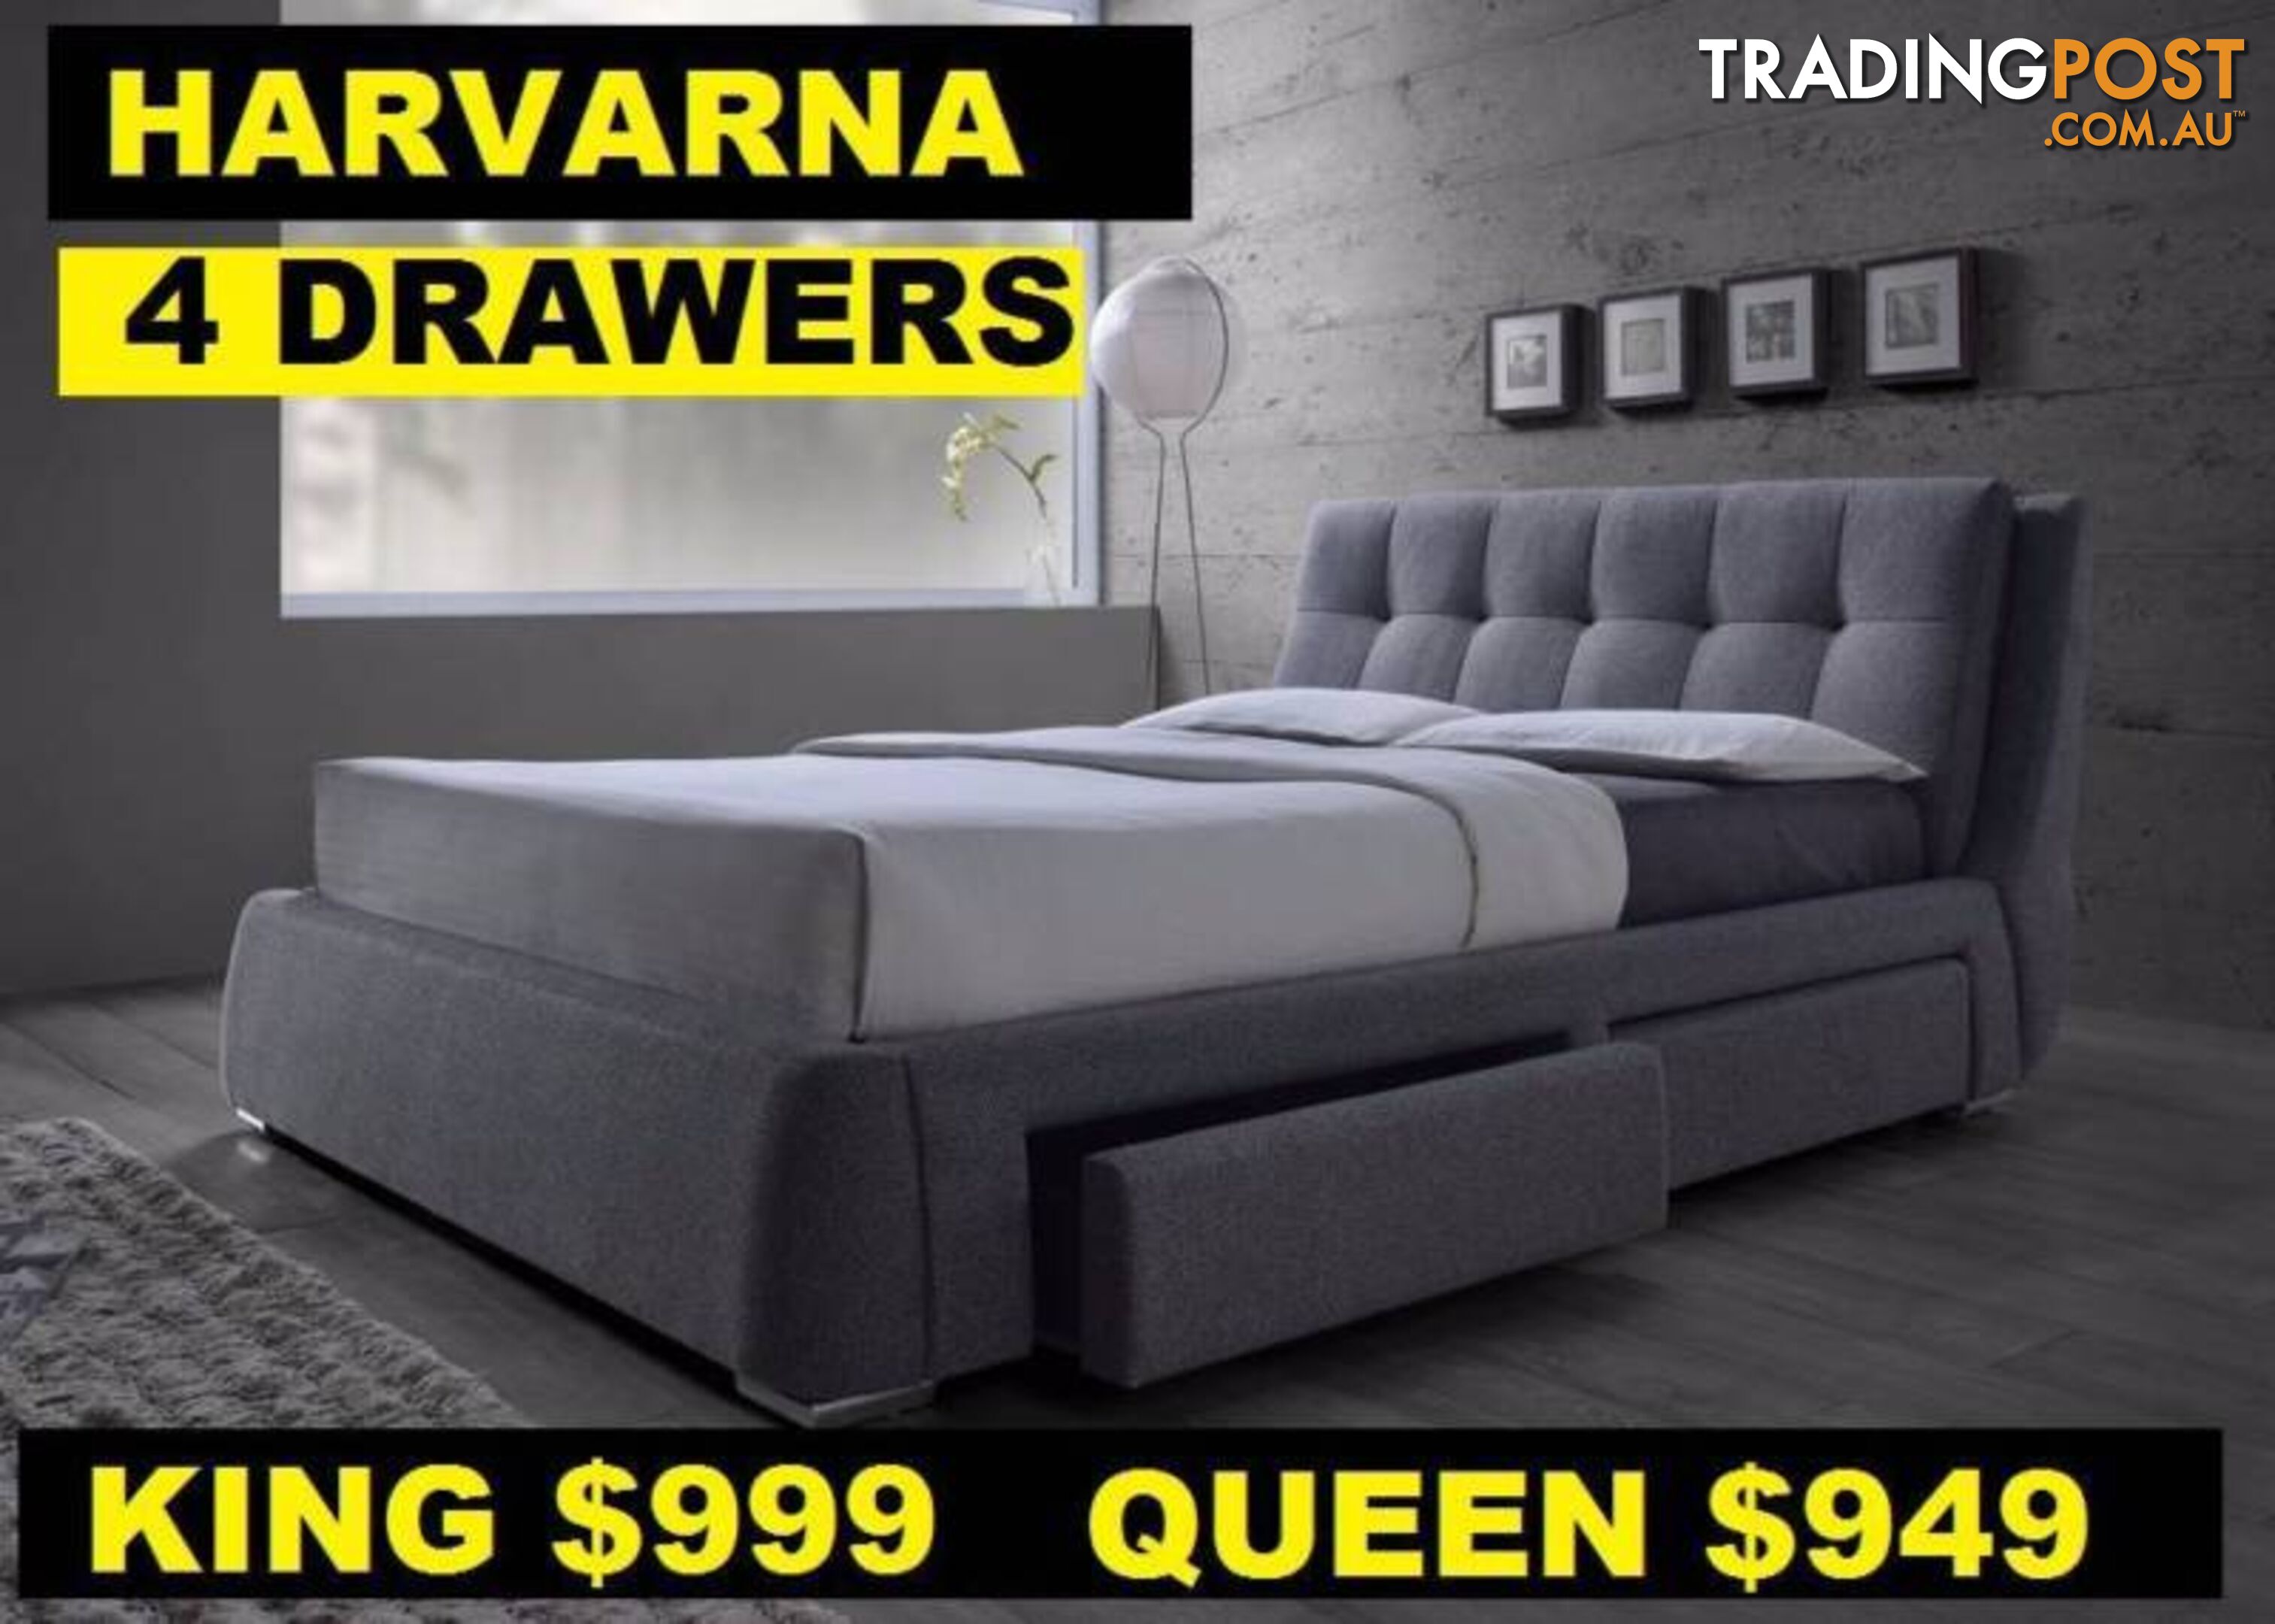 NEW QUEEN BED And King Bed Frame With Drawers. RENT KEEP $12.90PW